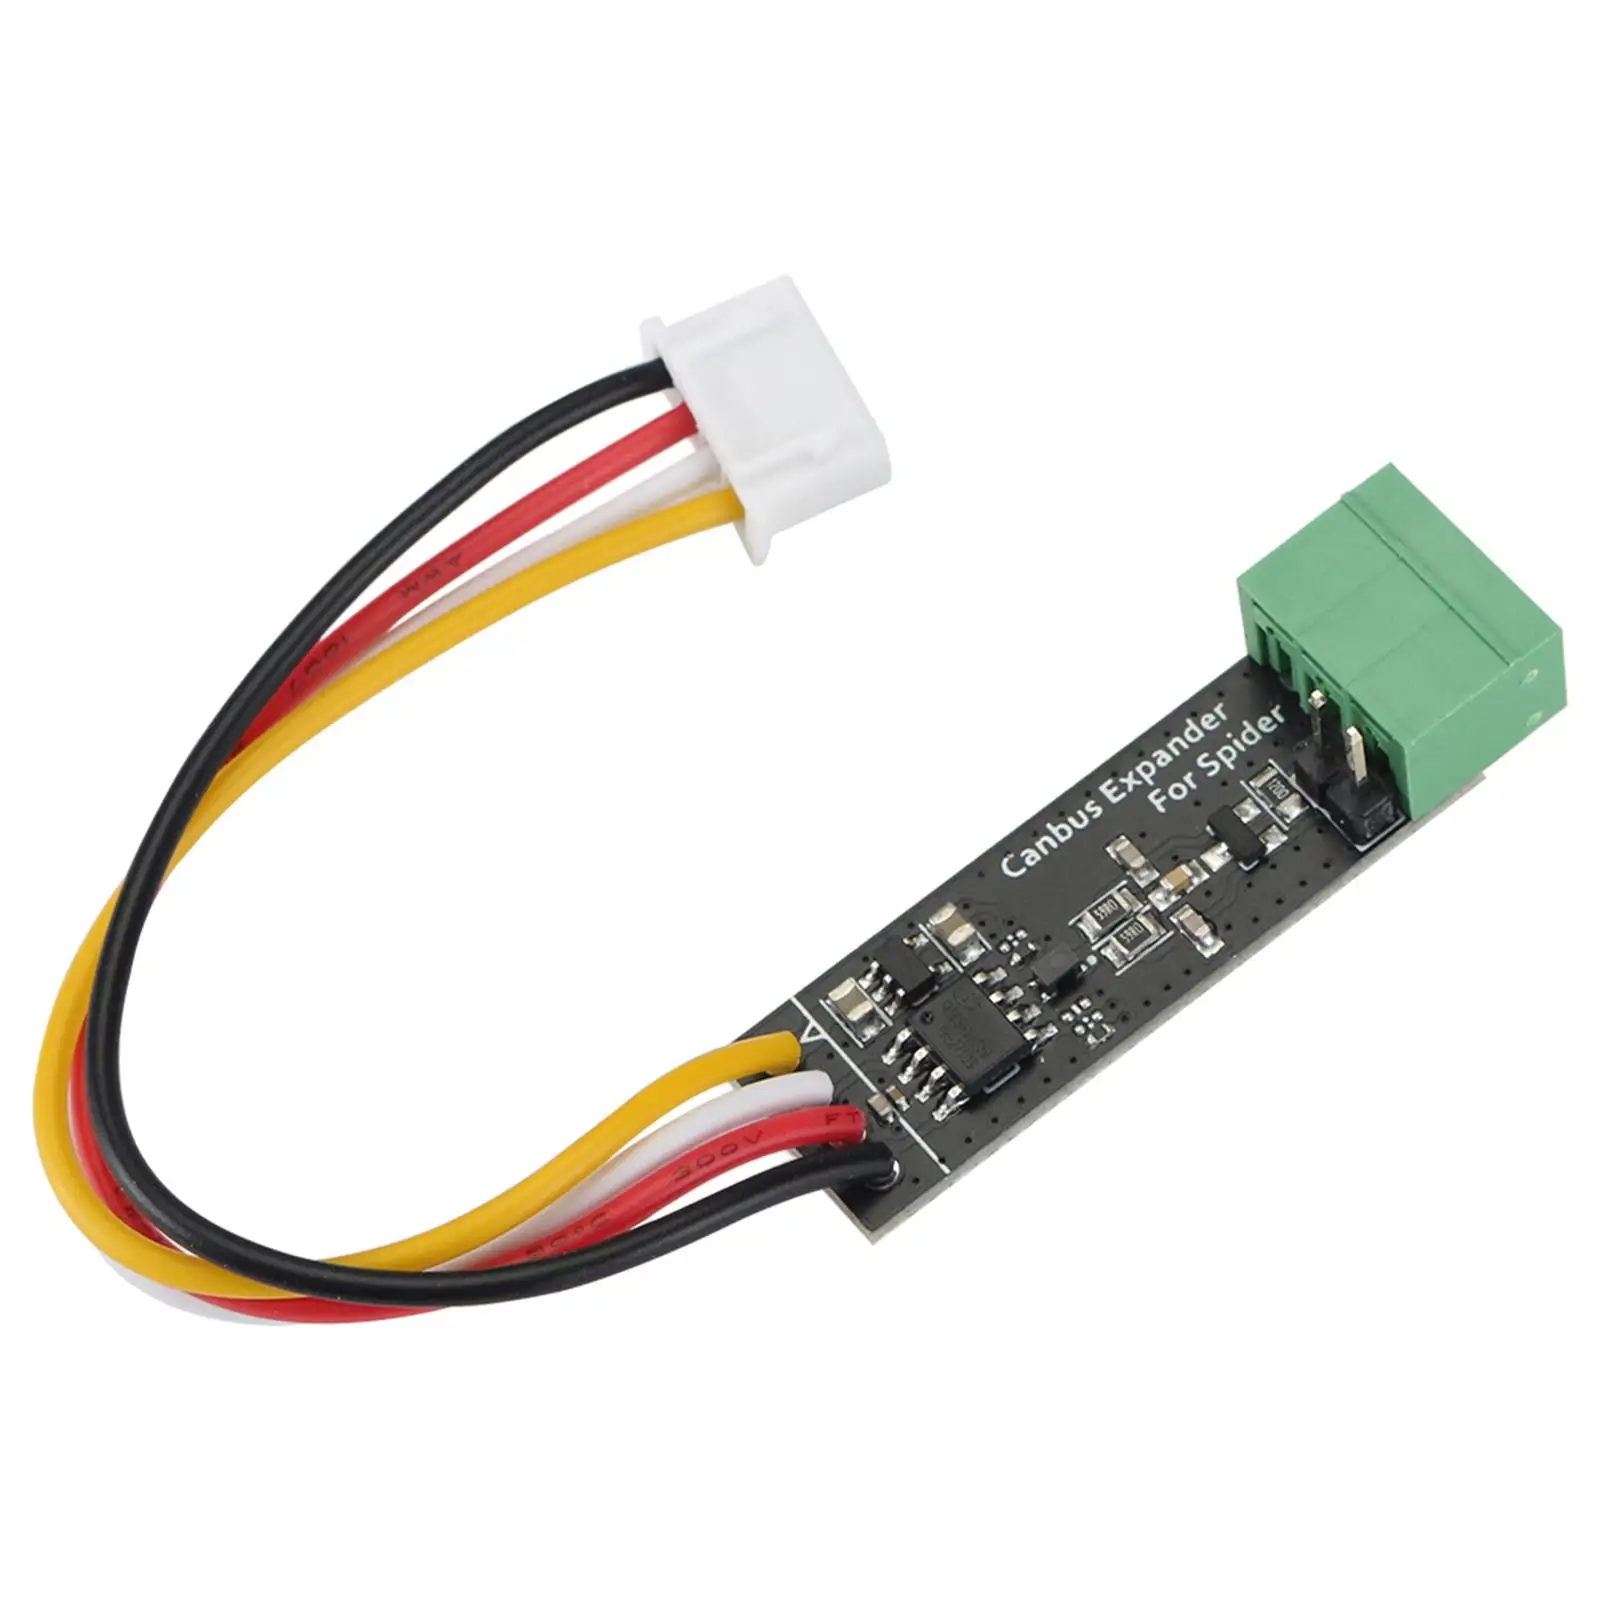 Canbus Expander Module Replacement Accessory Transceiver for Spider Board